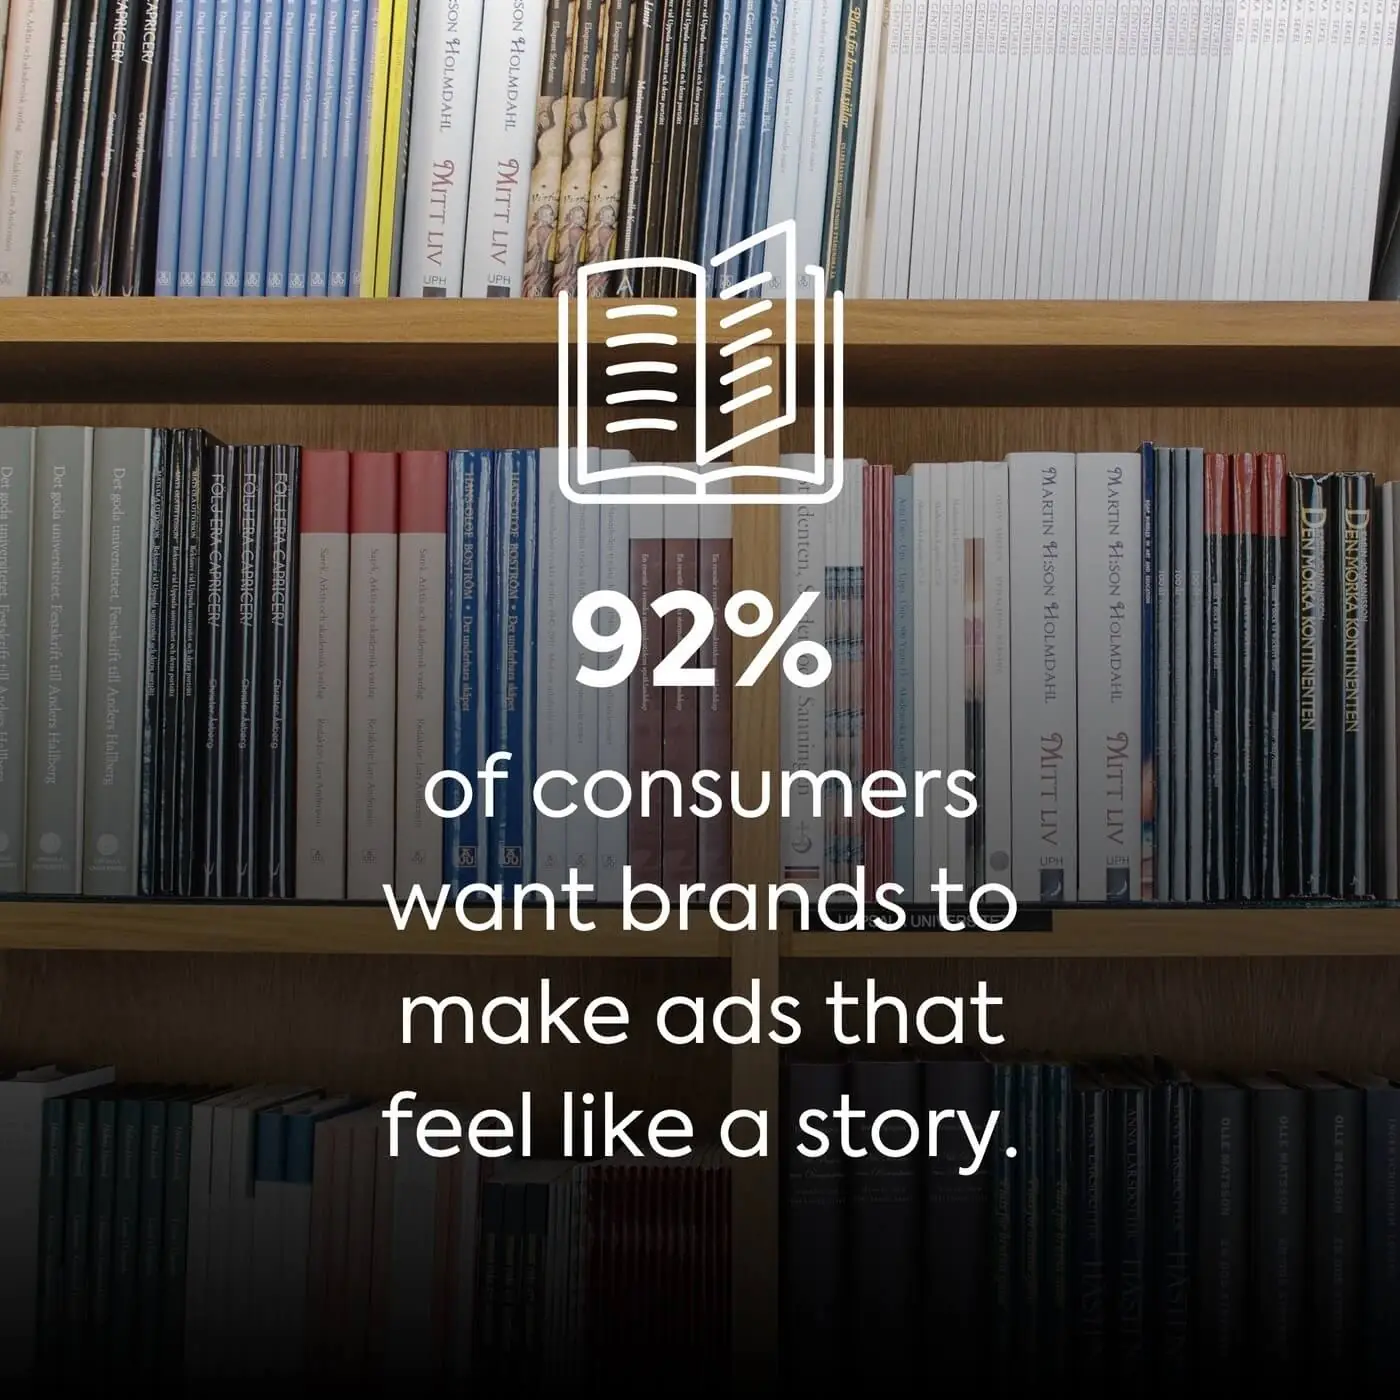 9 % of consumers want brands to make ads that feel like a story.